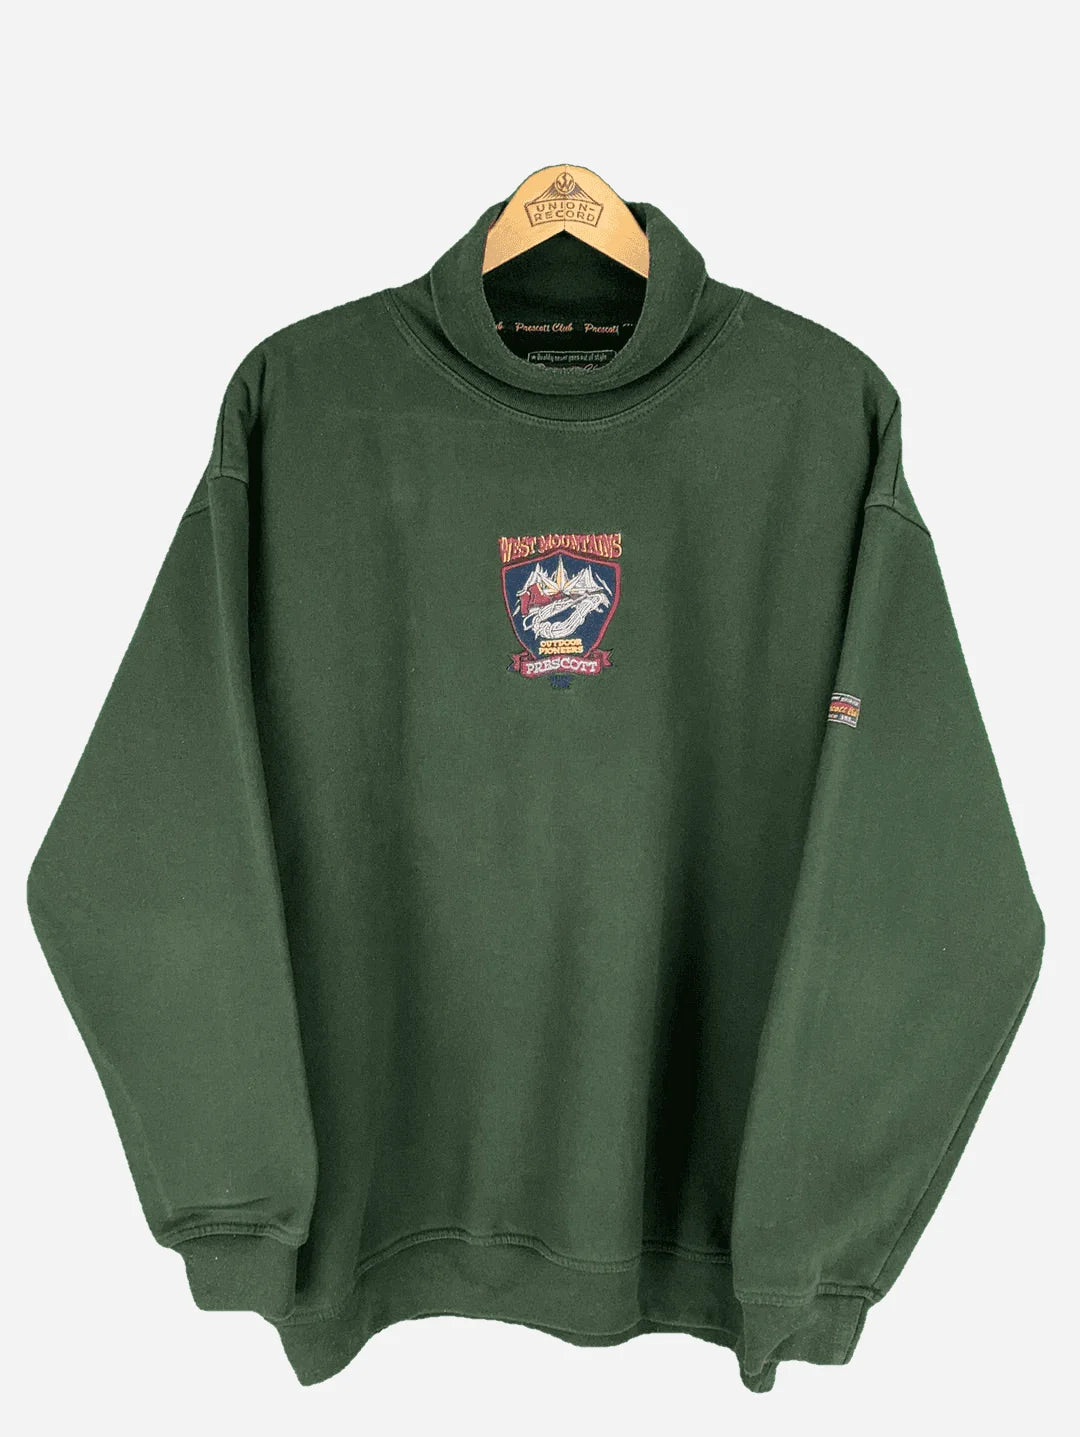 „West Mountains“ Sweater (XL)